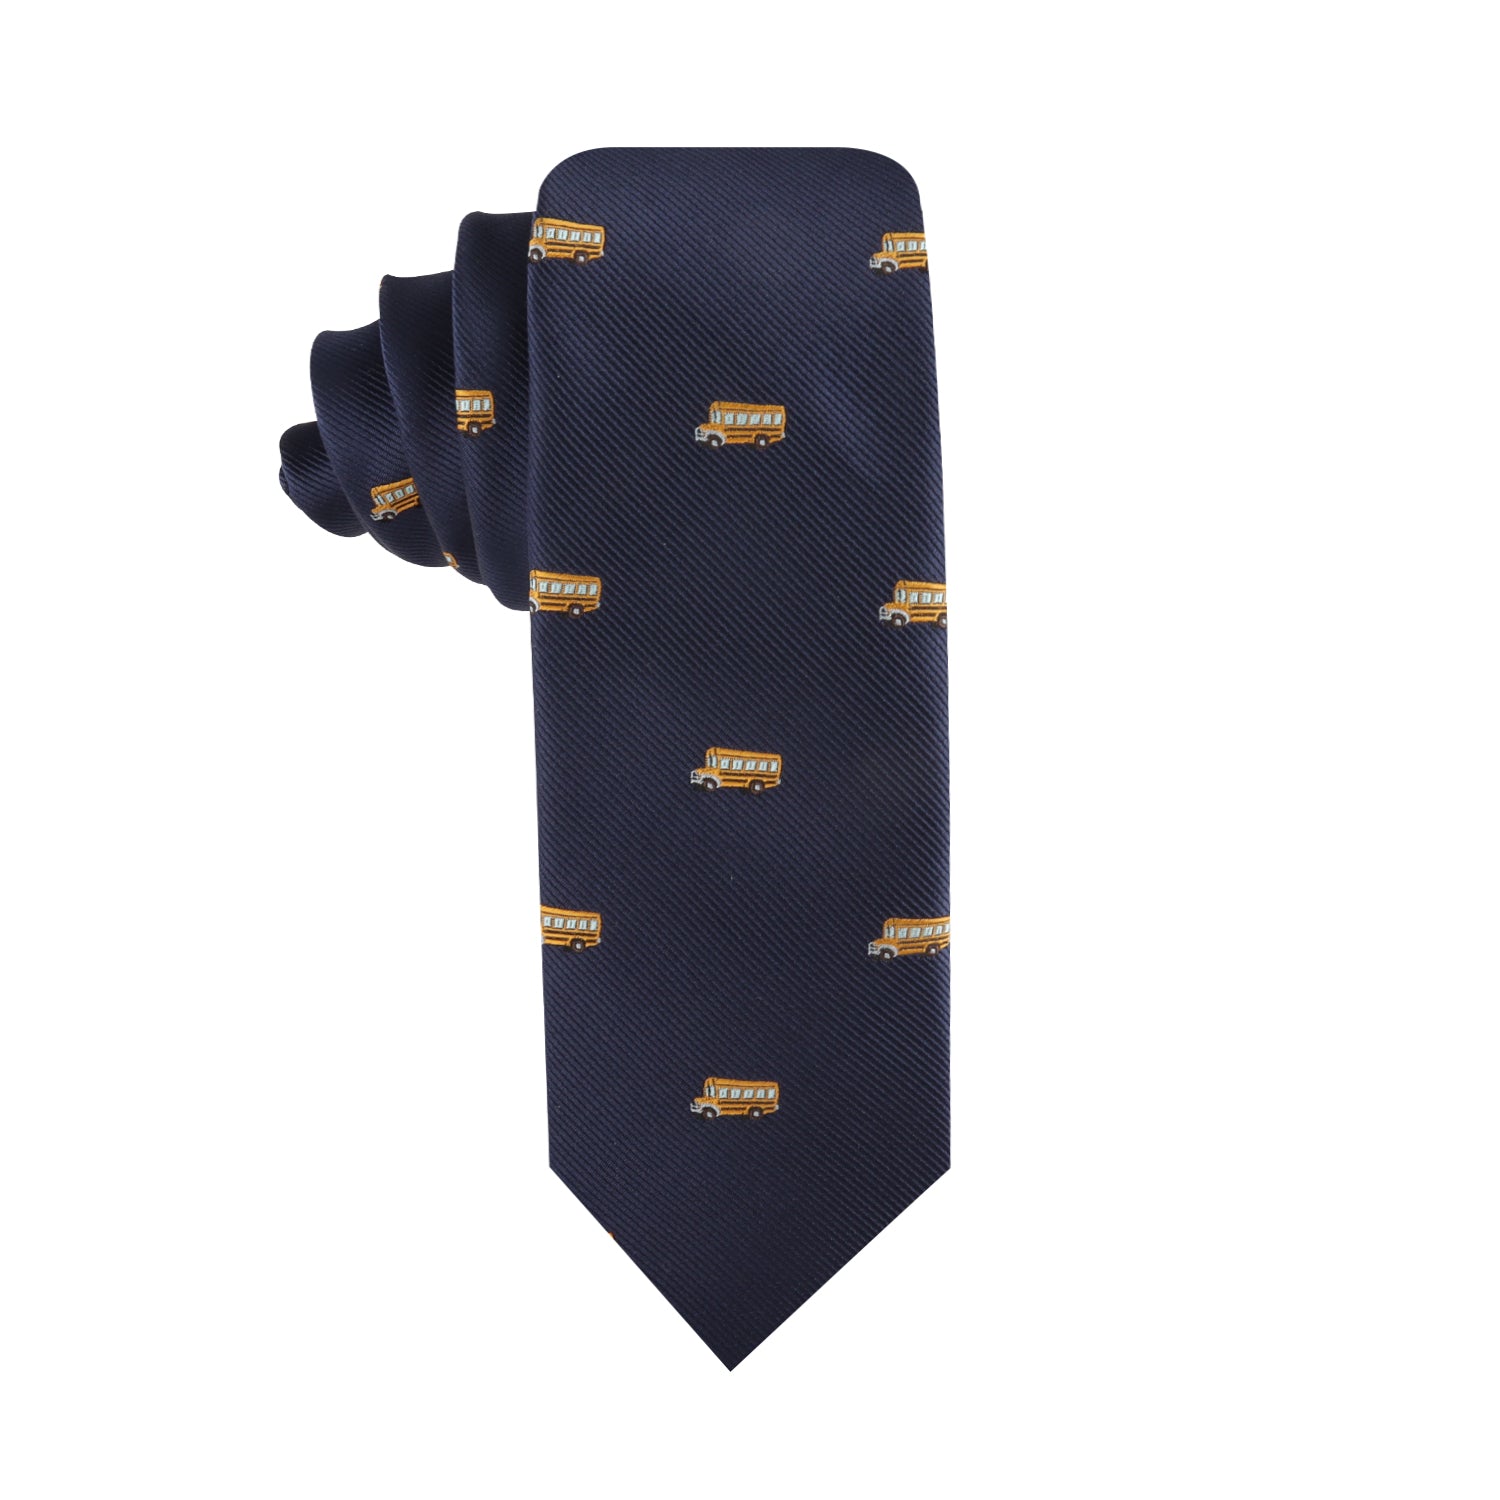 School Bus Skinny Tie with a pattern of small yellow and brown rectangular logos, displayed against a white background.